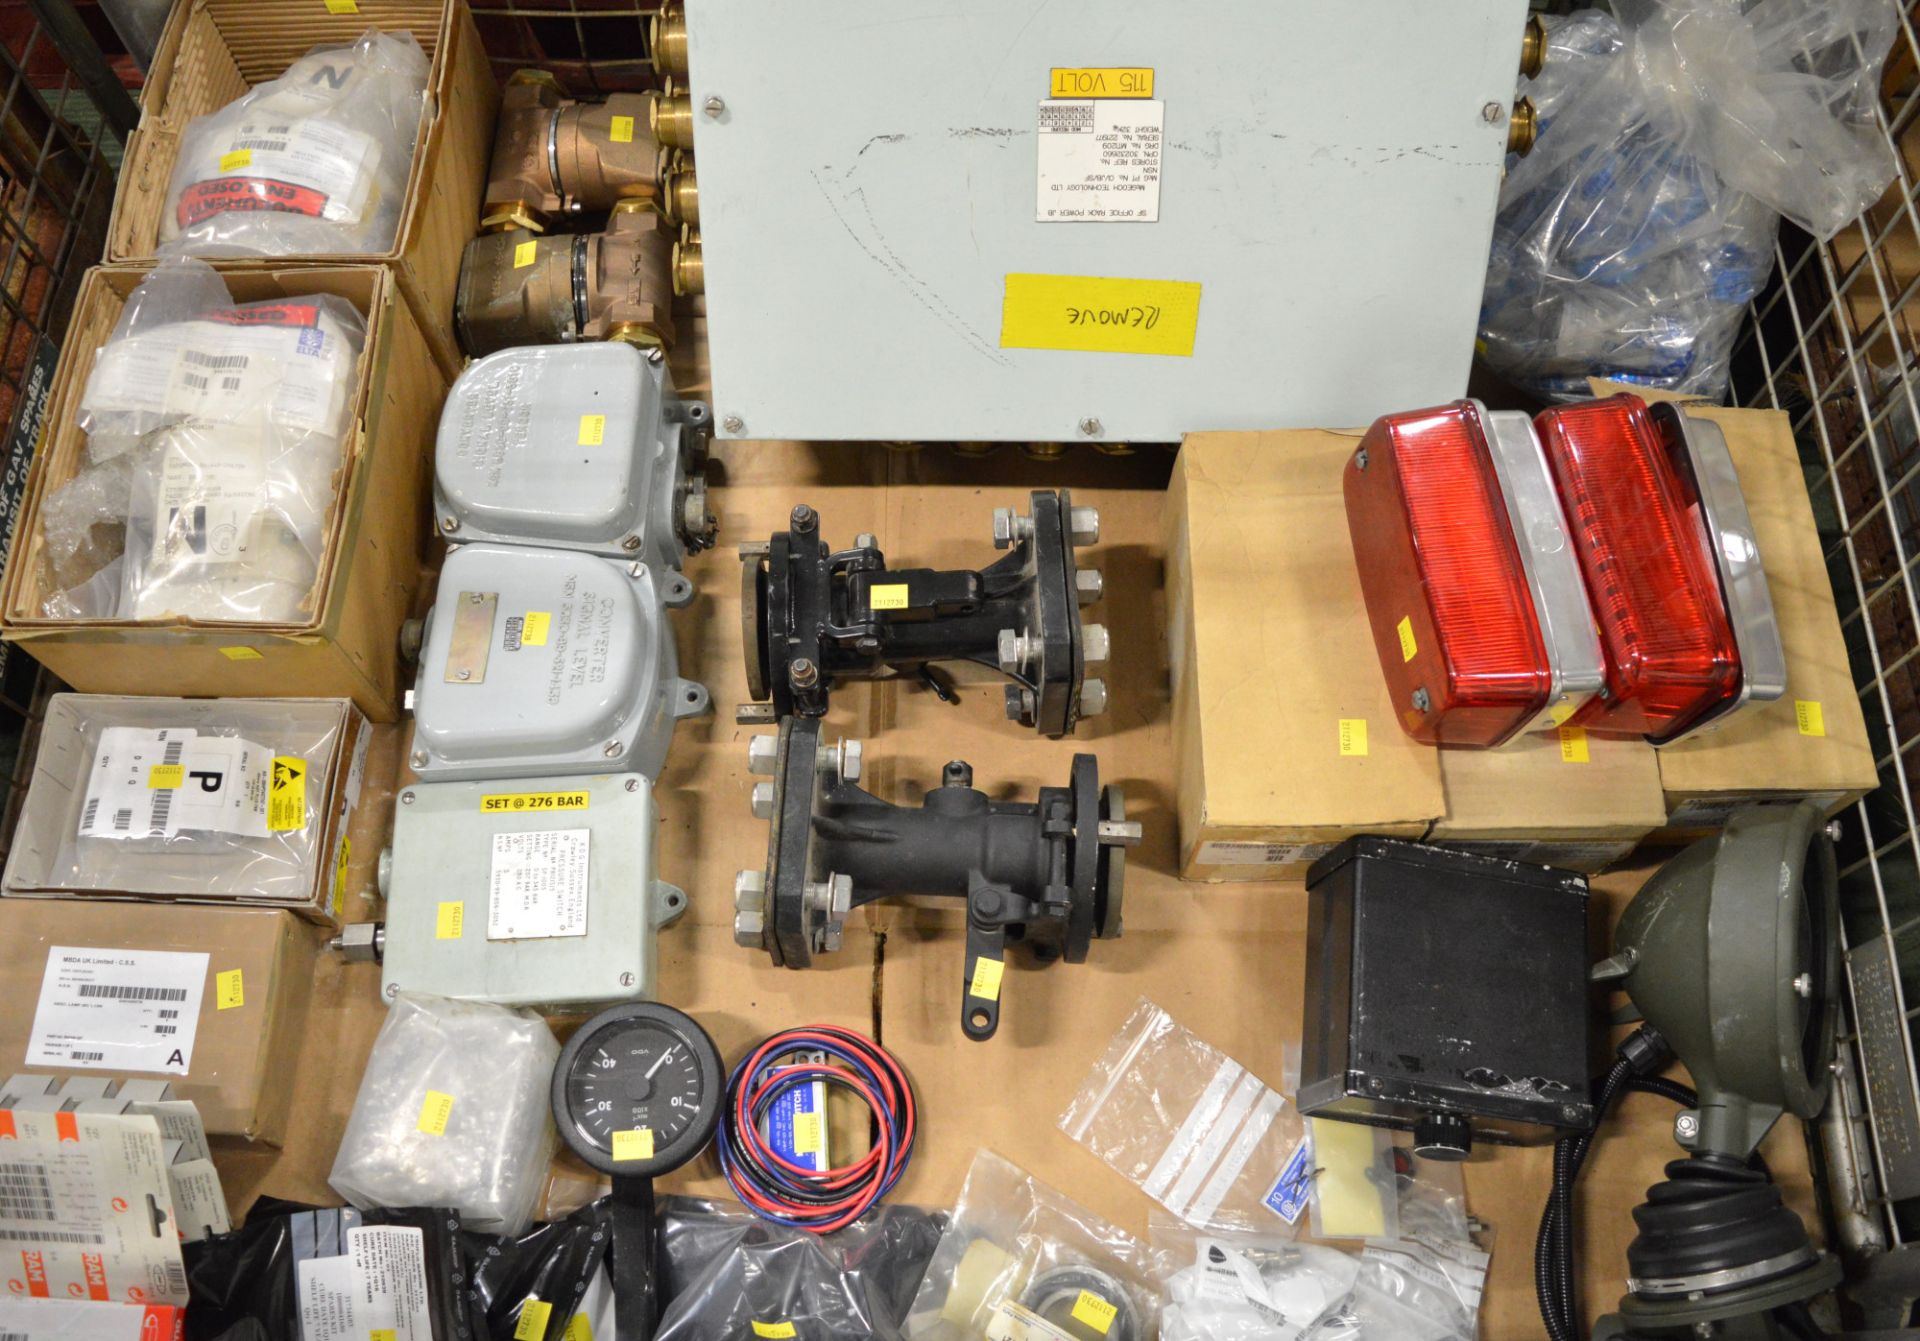 Flood Light. Pressure Switch, Level SWitches, Fans, Red Bulkhead Lights. - Image 2 of 2